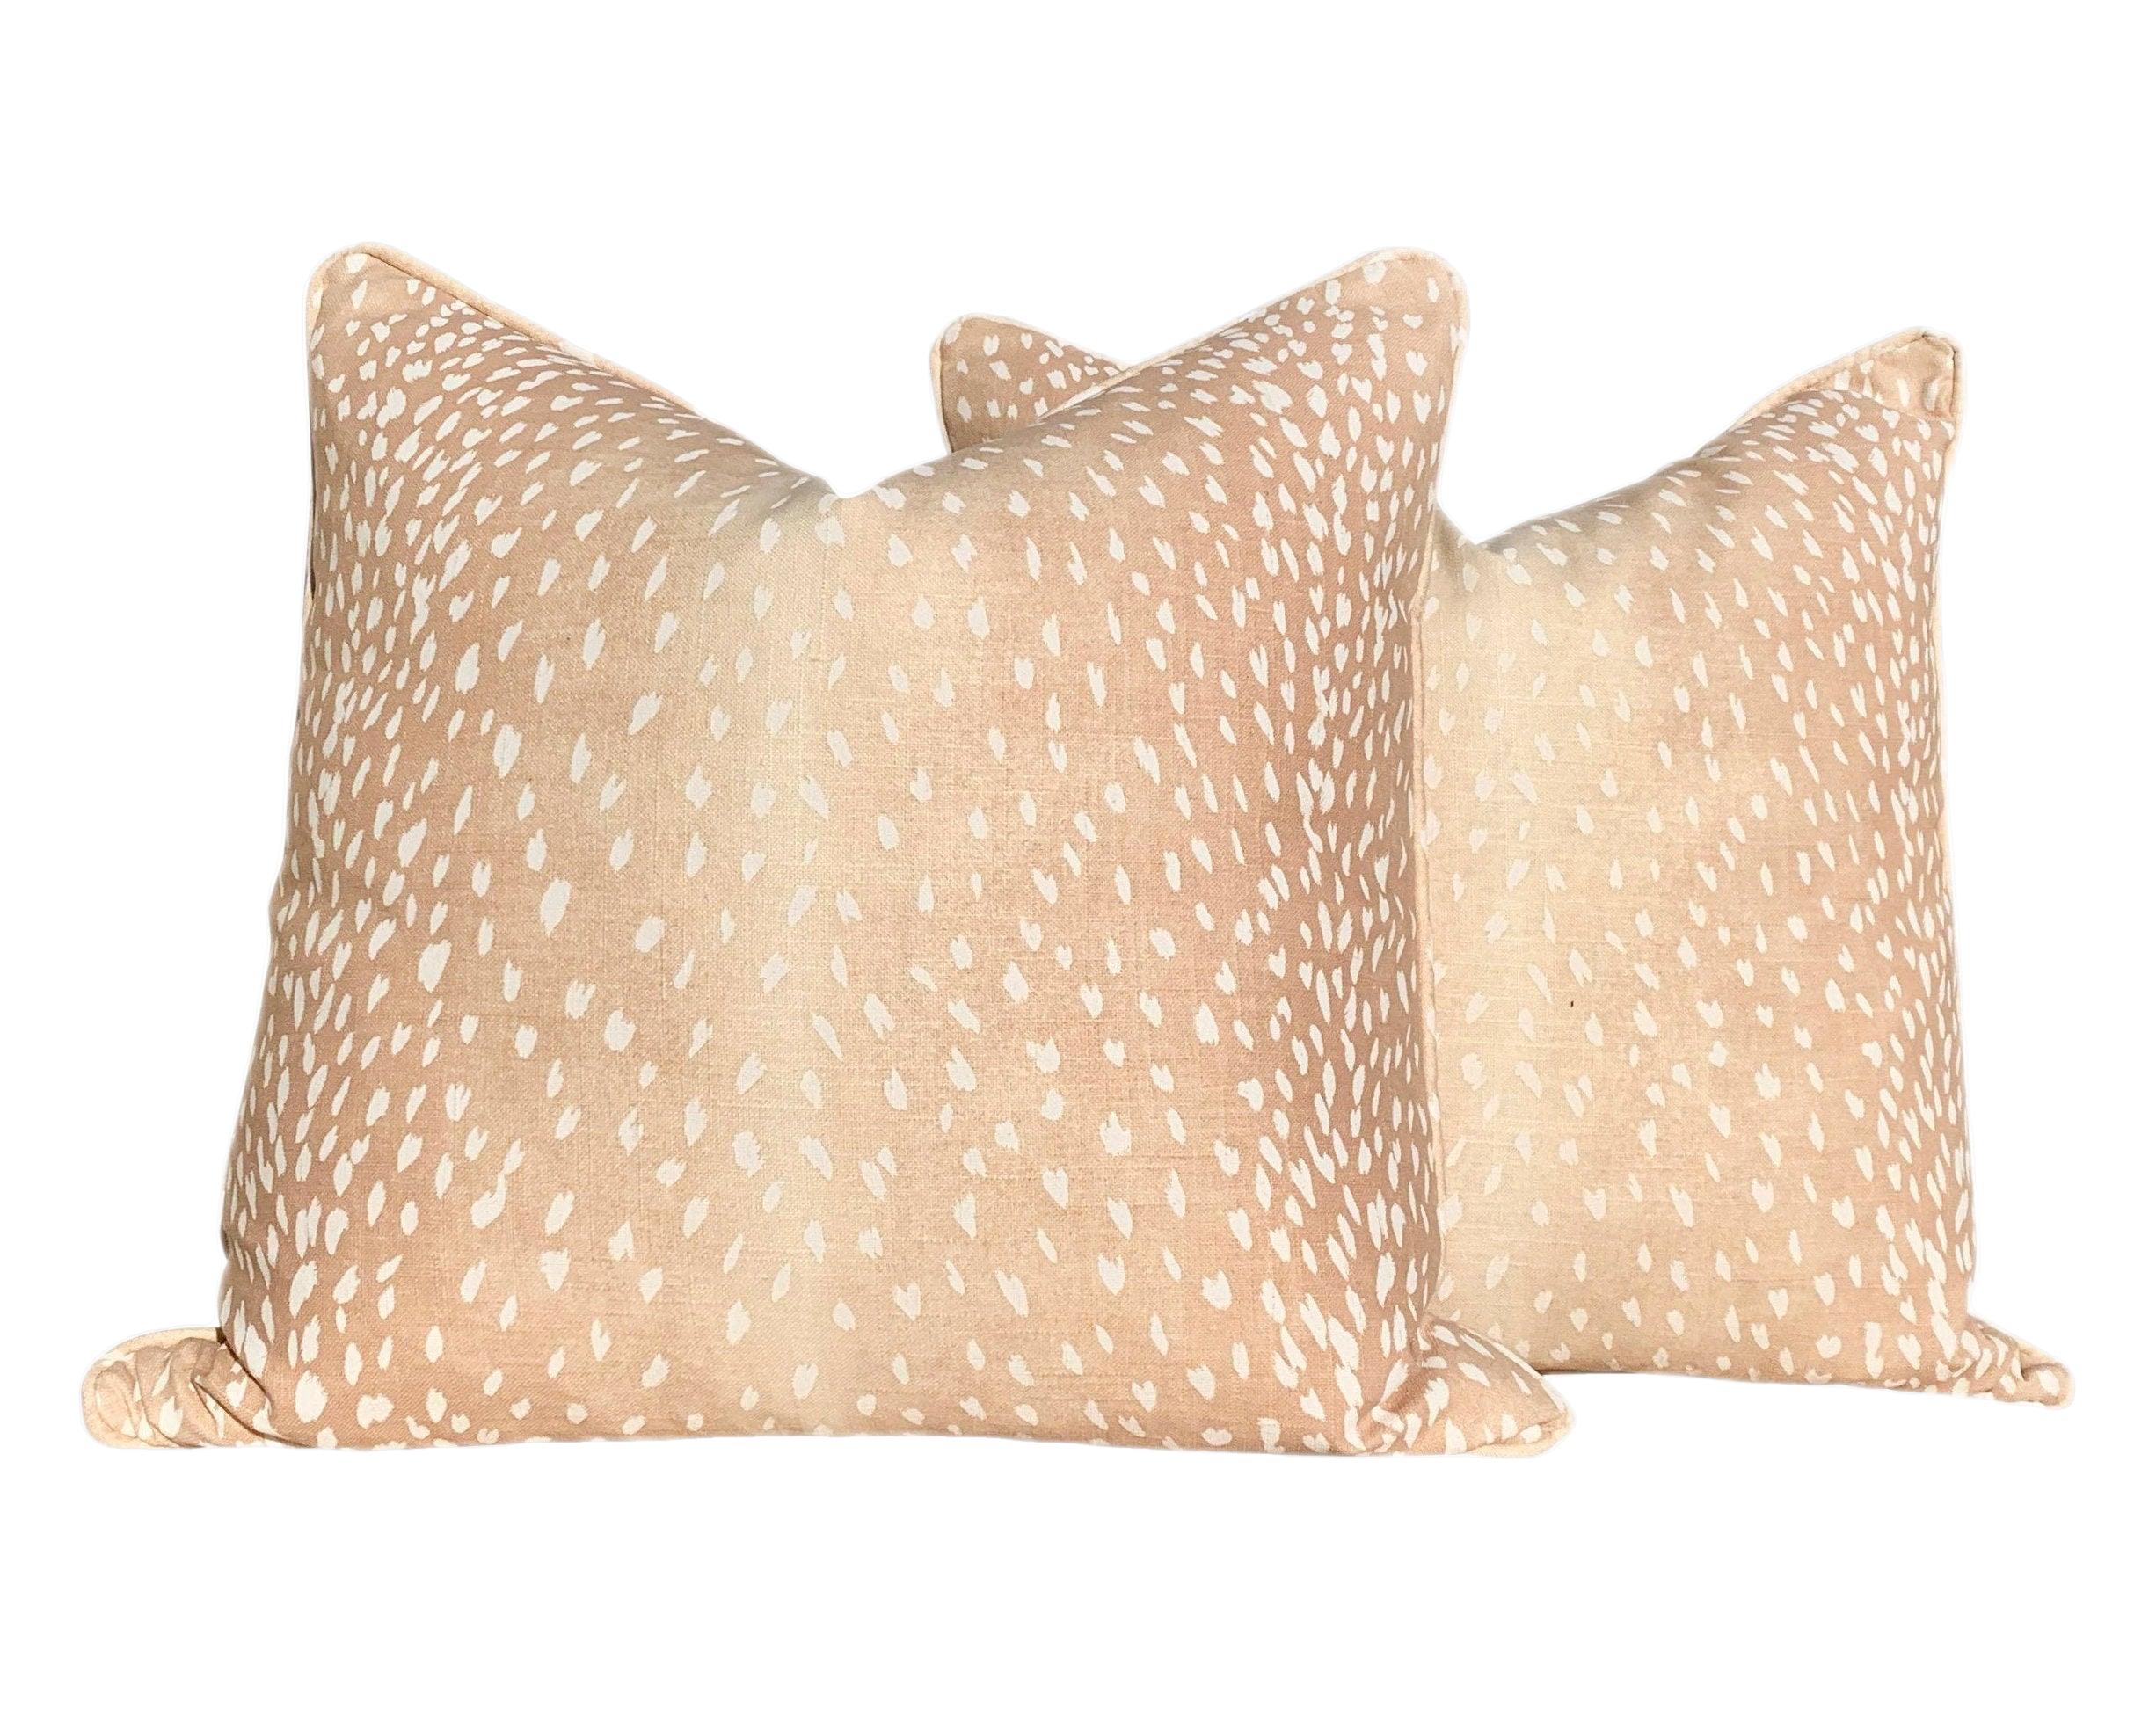 Antelope Pillow In Blush and Cream. Long Lumbar Pillow // Animal Skin Blush Pillow // Euro Sham Pillow 26x26 // Spotted Pillow Cover